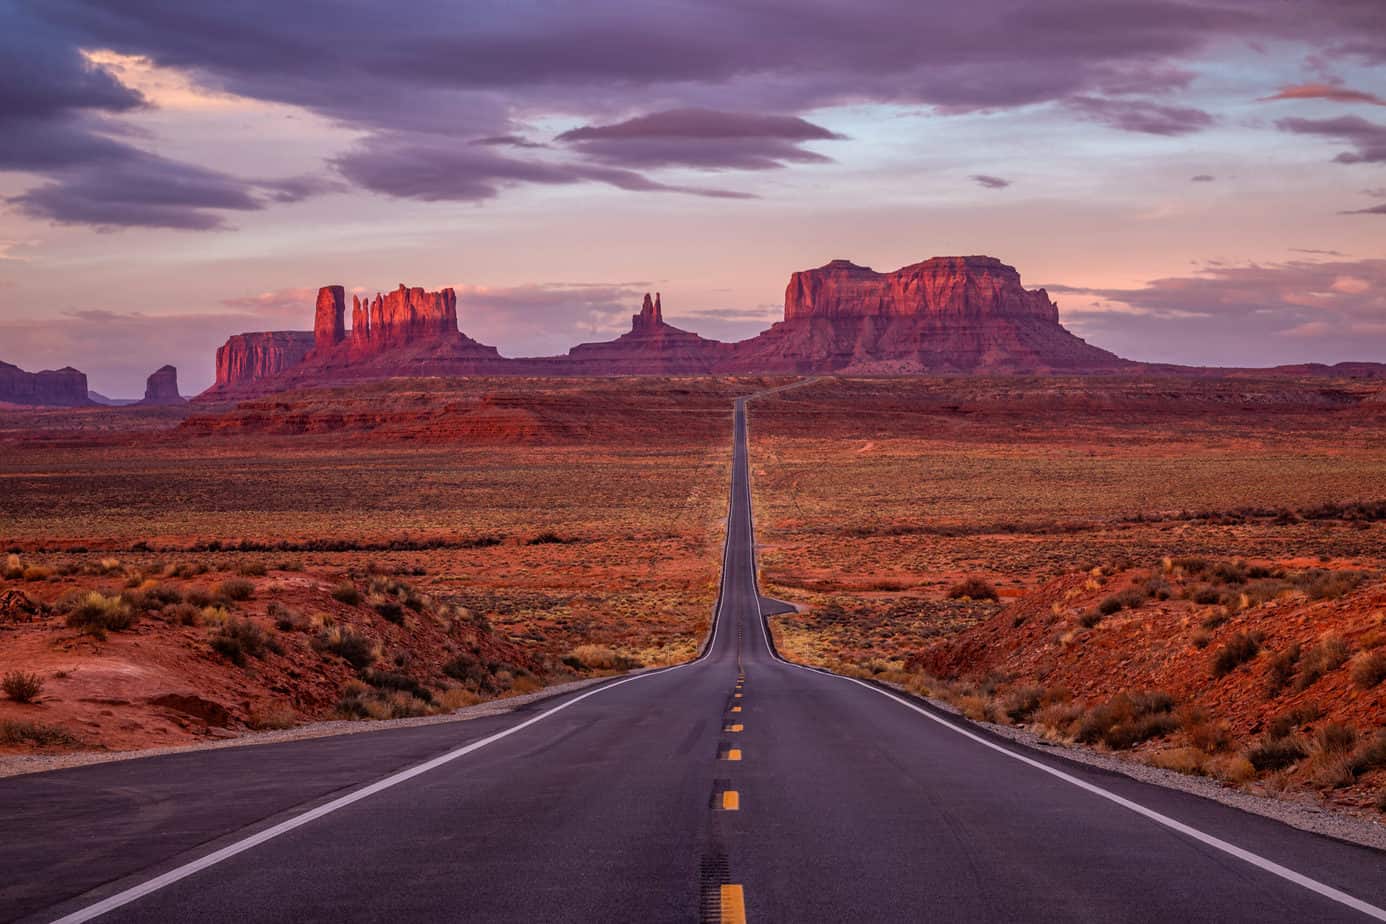 usa road trip playlist - Amazing sunrise with pink, gold and magenta colors near Monument Valley, Arizona, USA.